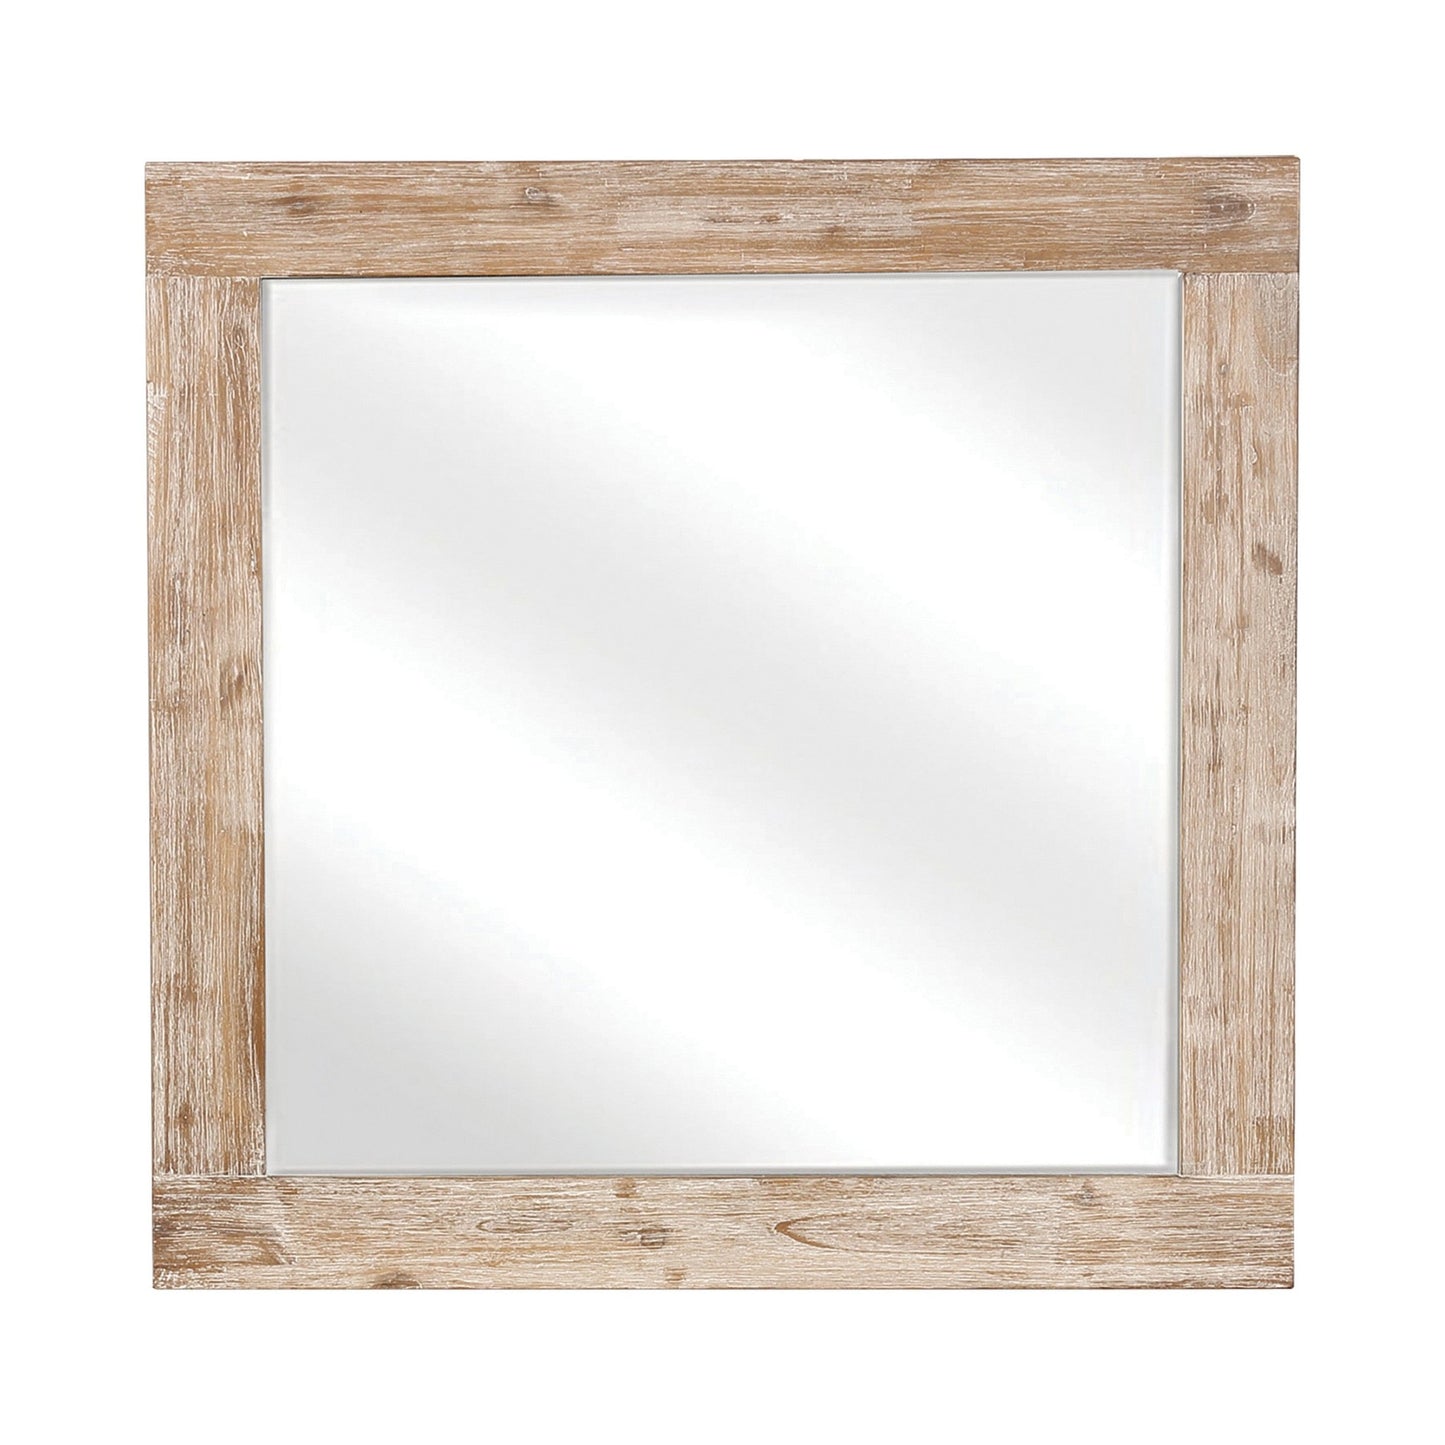 Benzara Square Light Brown Wooden Framed Wall Mirror With Hewn Saw Details